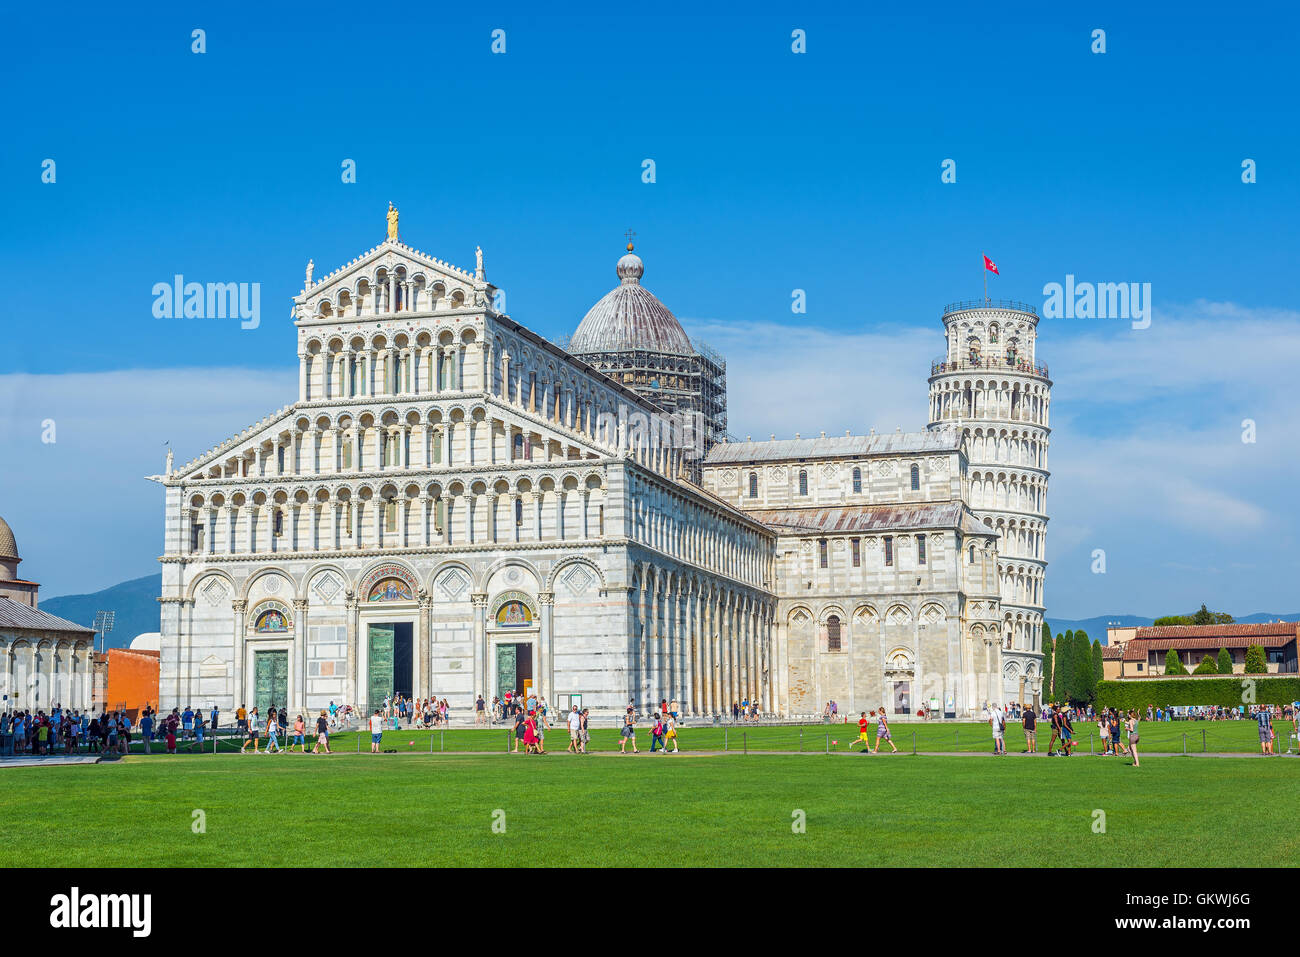 Tourist waiting to visit the Duomo of Pisa in Piazza dei Miracoli square. Tuscany, Italy. Stock Photo